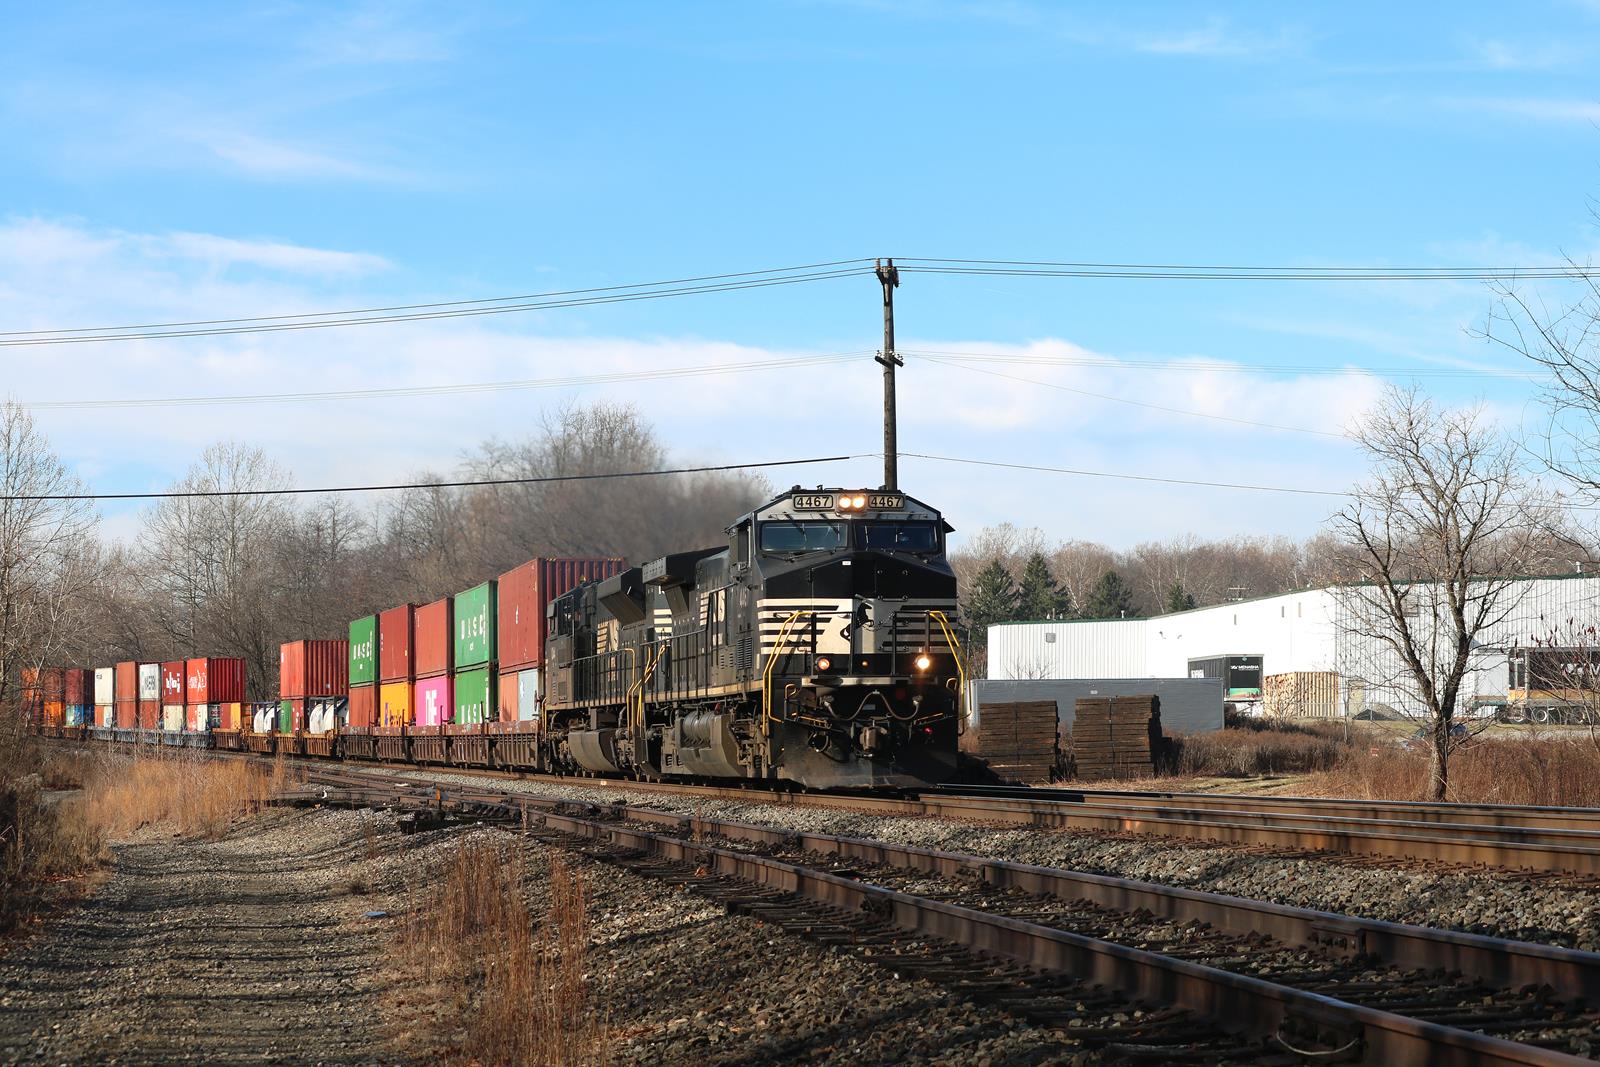 NS 4467 is a class GE AC44C6M and  is pictured in Loyalhanna, Pennsylvania, United States.  This was taken along the Pittsburgh Line on the Norfolk Southern Railway. Photo Copyright: Adam Klimchock uploaded to Railroad Gallery on 11/24/2022. This photograph of NS 4467 was taken on Thursday, November 24, 2022. All Rights Reserved. 